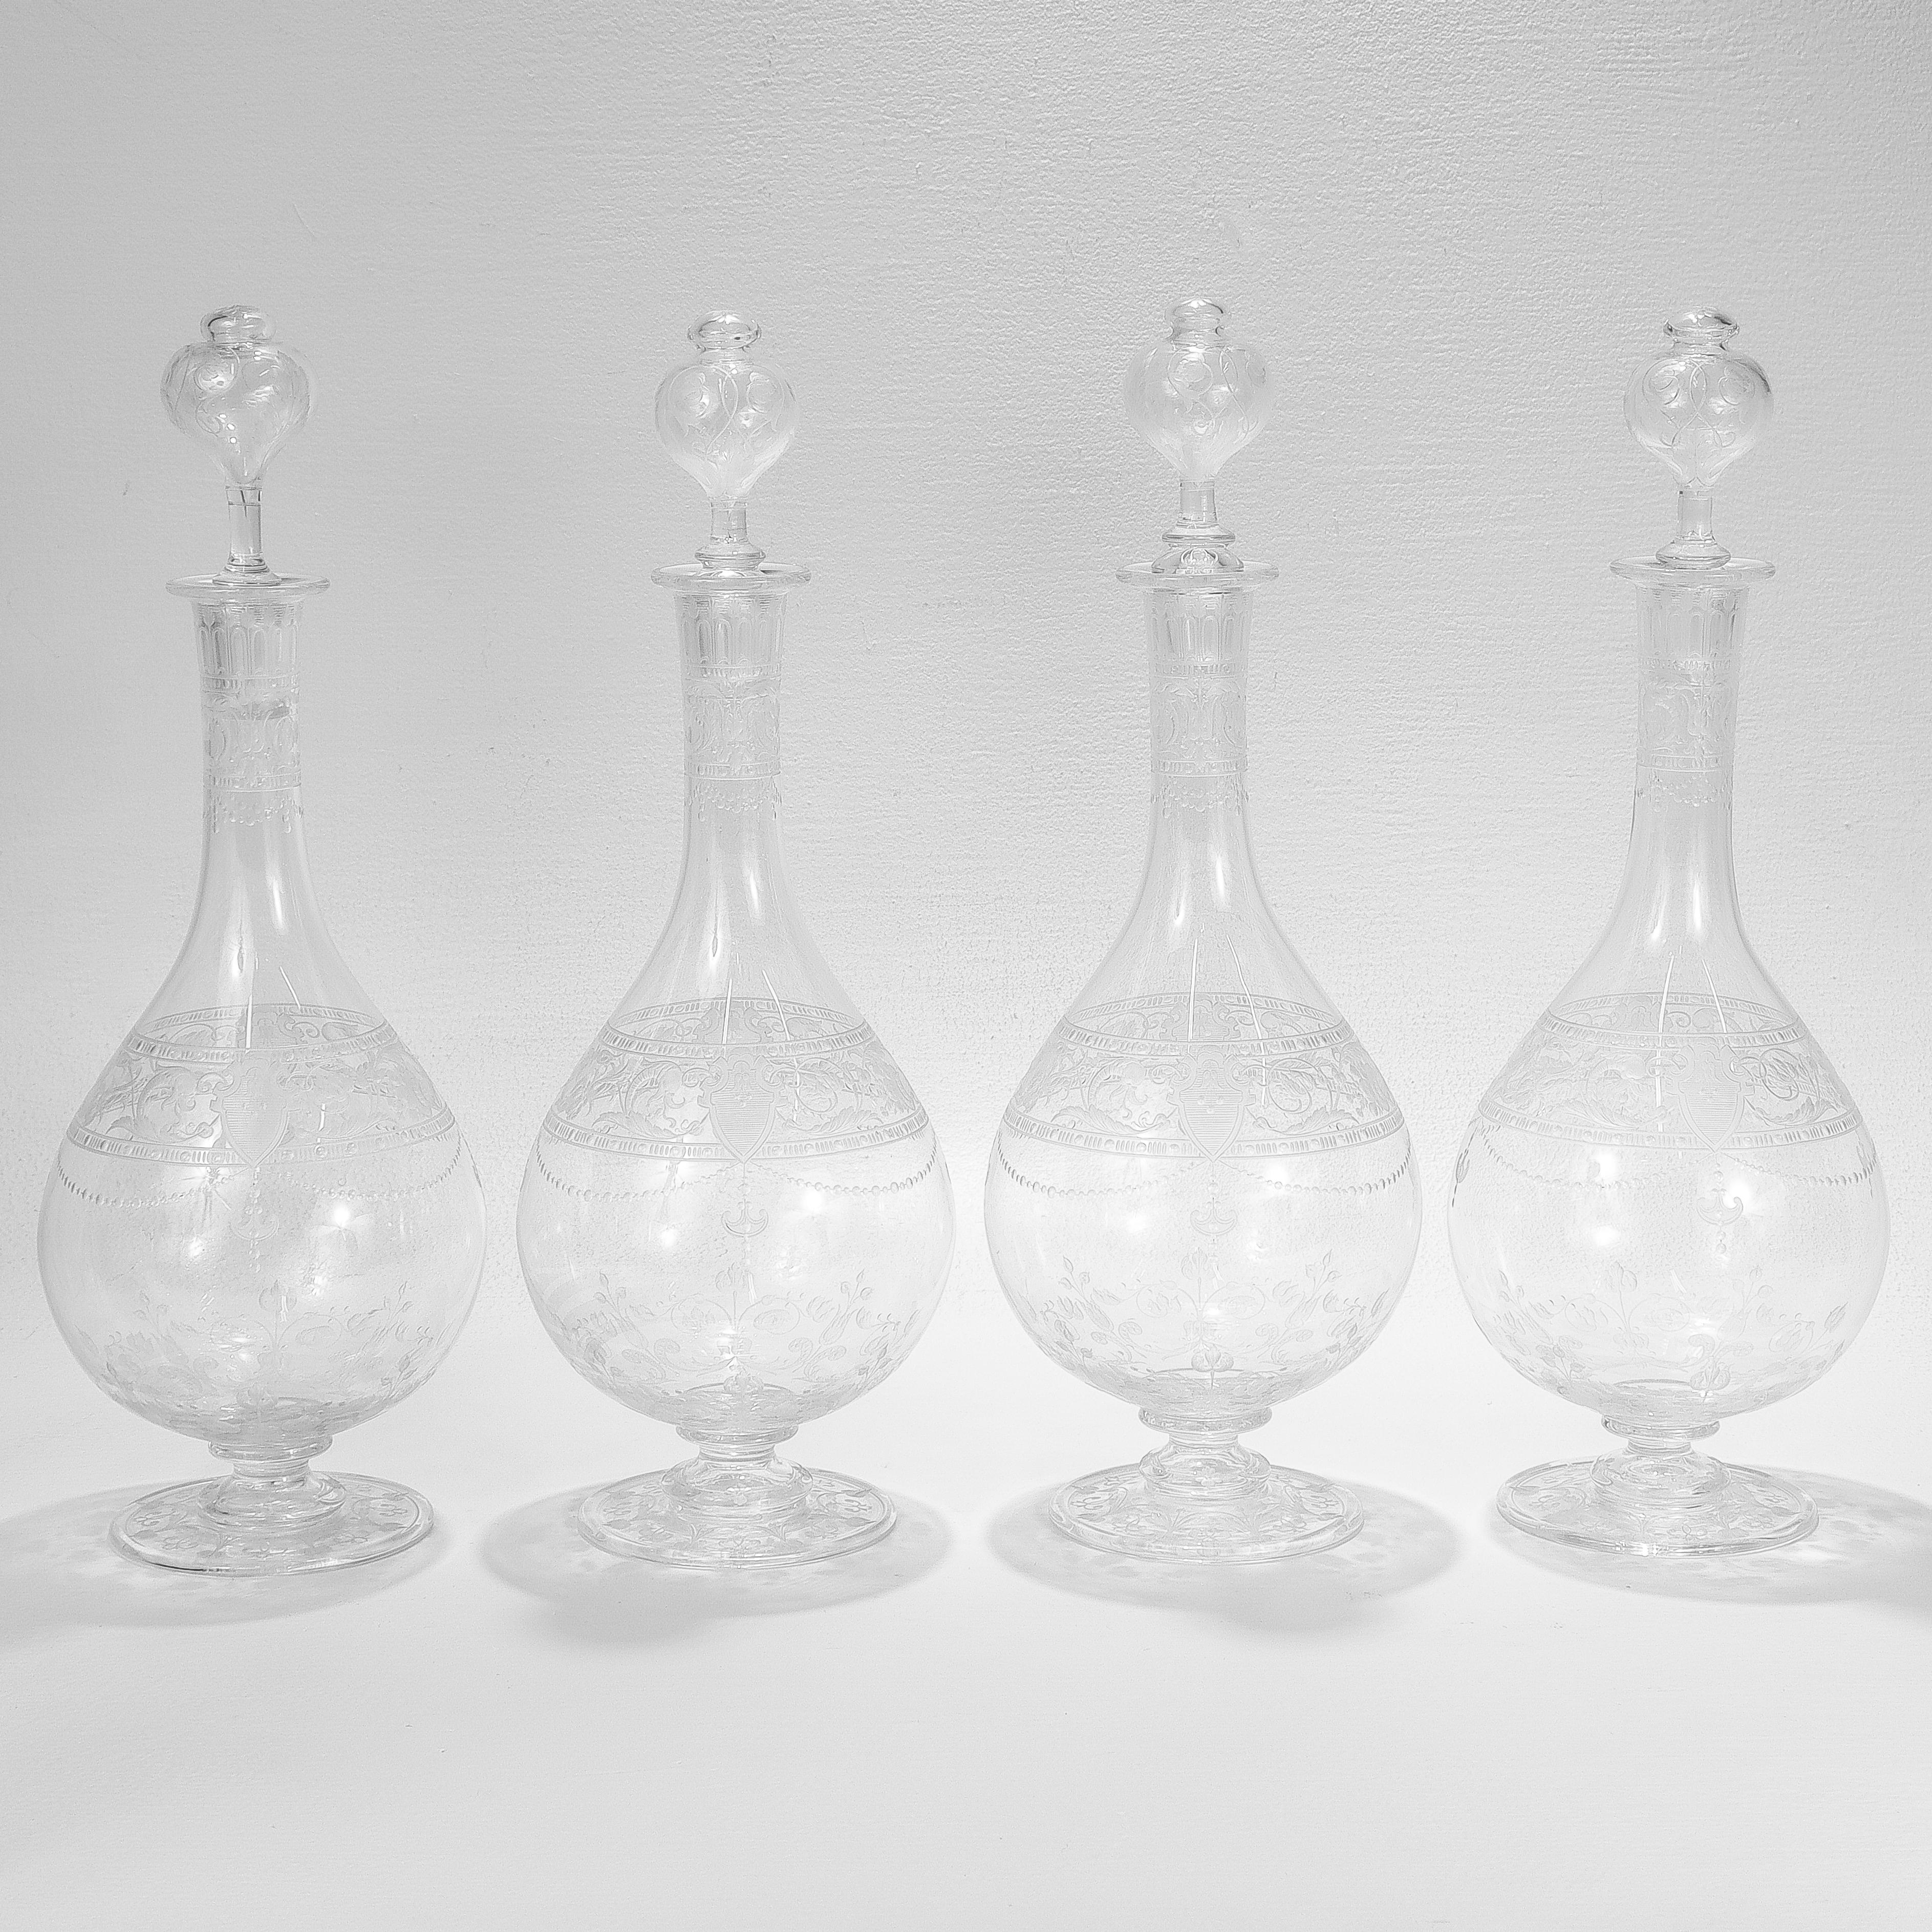 Late Victorian Set of 4 Antique Stourbridge Etched & Engraved Glass Decanters with Stoppers